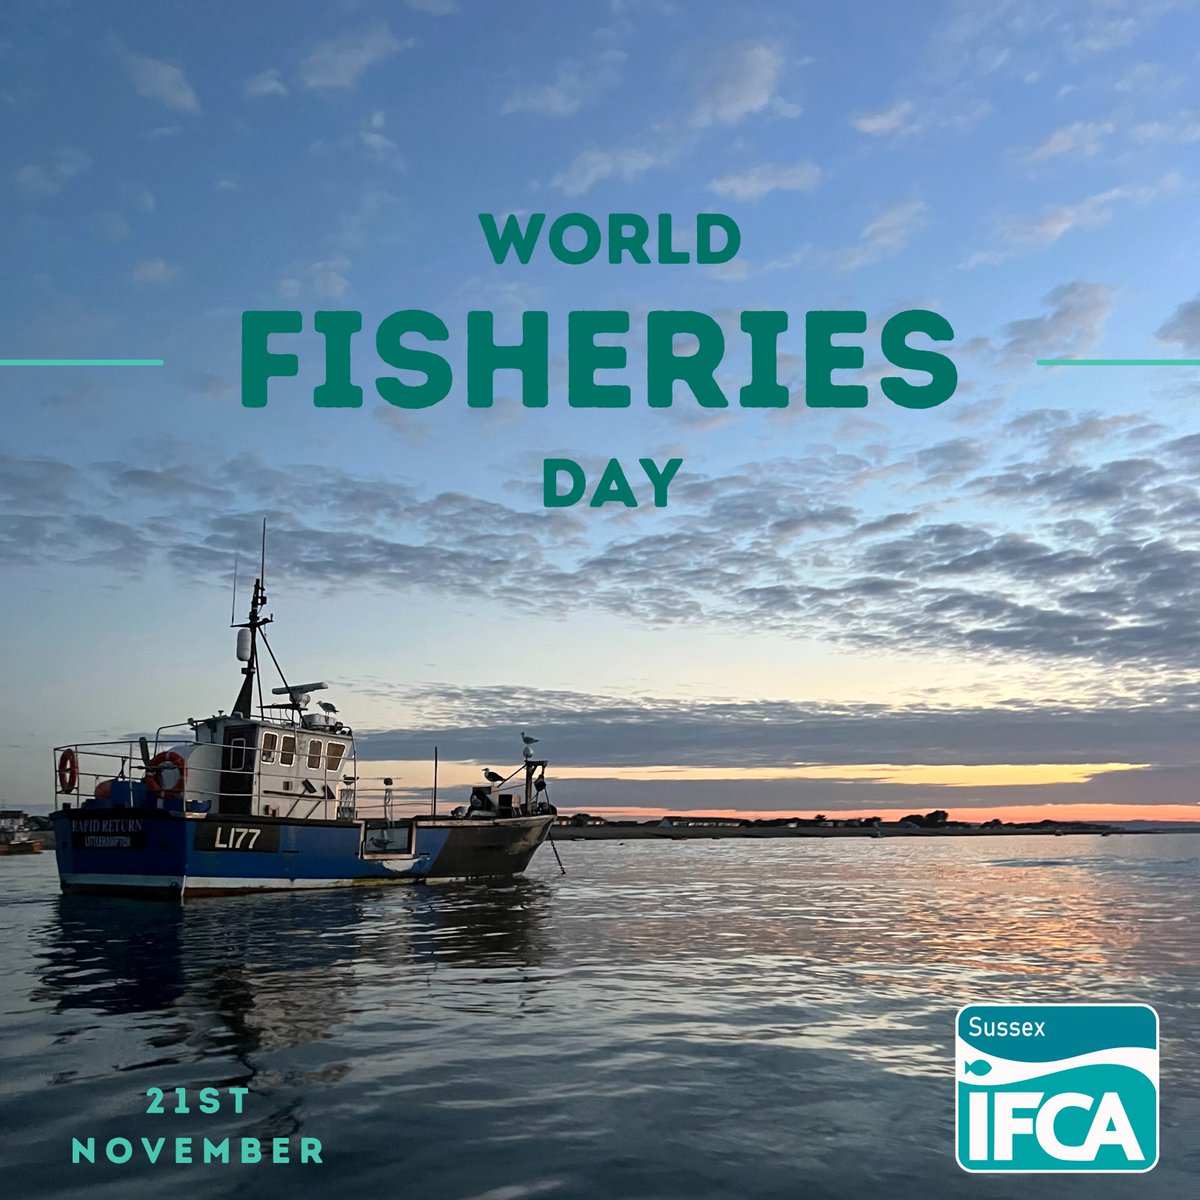 Celebrating #WorldFisheriesDay 🐟
We lead, champion & manage a sustainable #marineenvironment & #inshorefisheries, by successfully securing the right balance between social, environmental & economic benefits to ensure #healthyseas, #sustainablefisheries & viable #fishingindustry